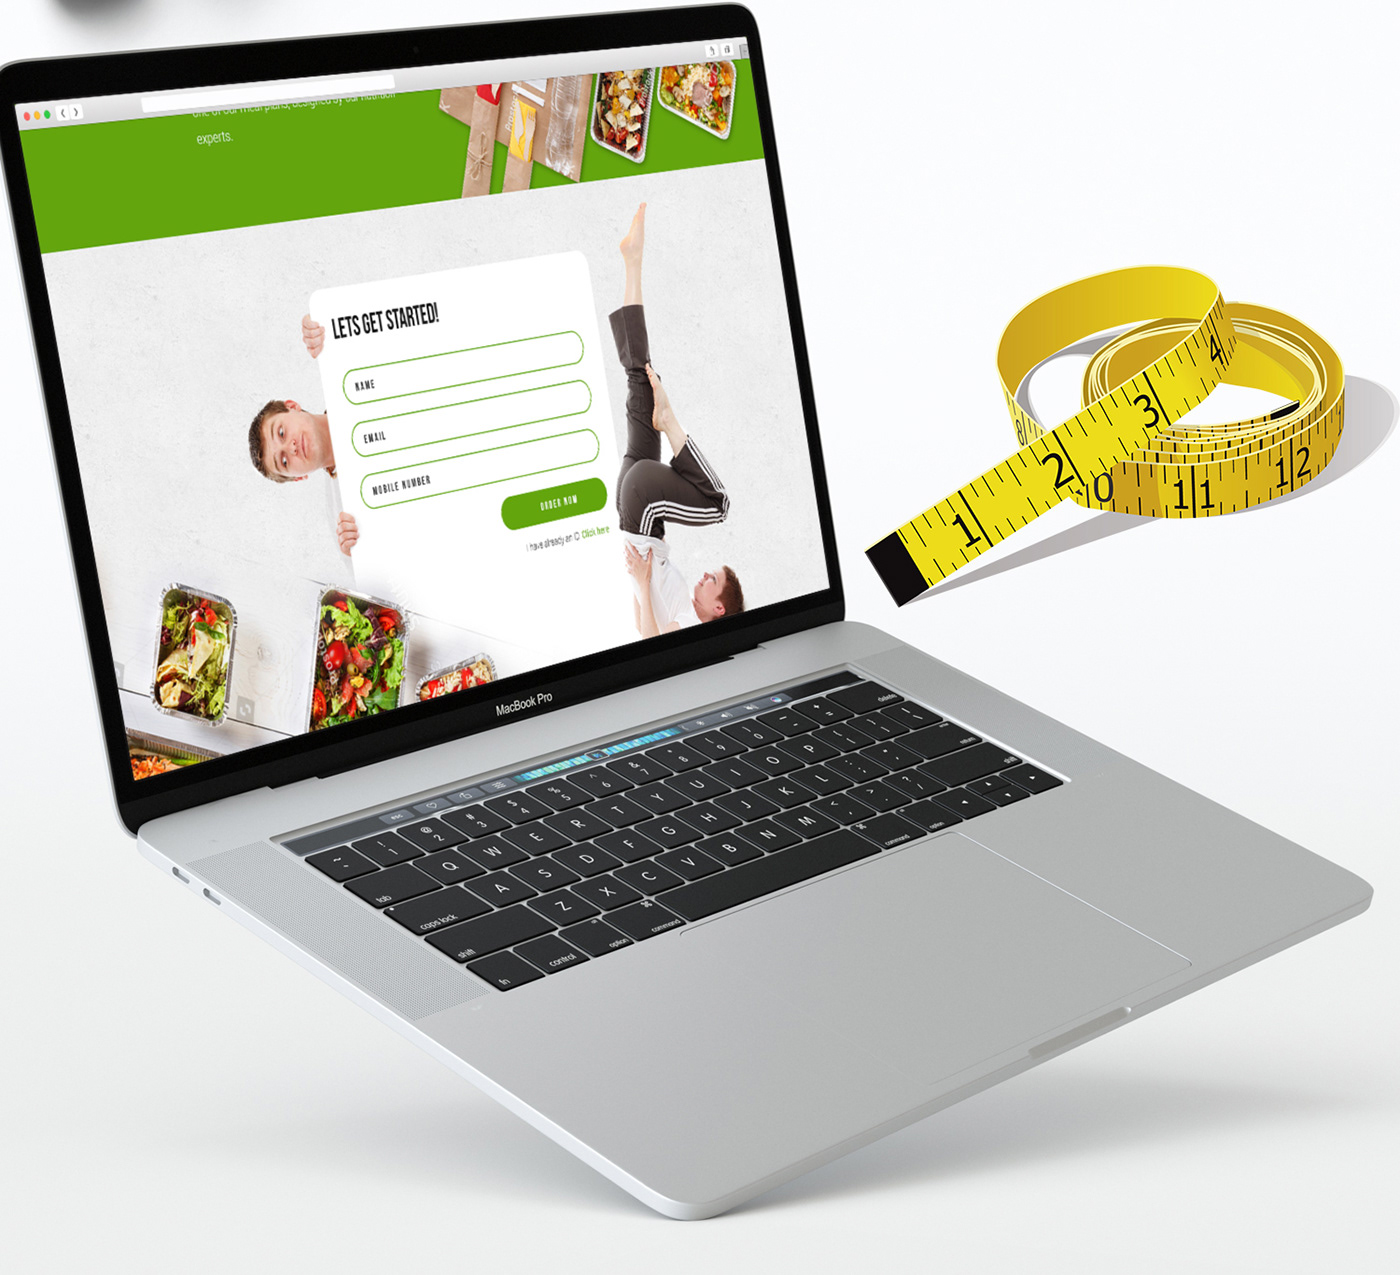 Web UI/UX parallax Responsive bootstrap FontAwesome wordpress food delivery subscription Meal Plan Diet